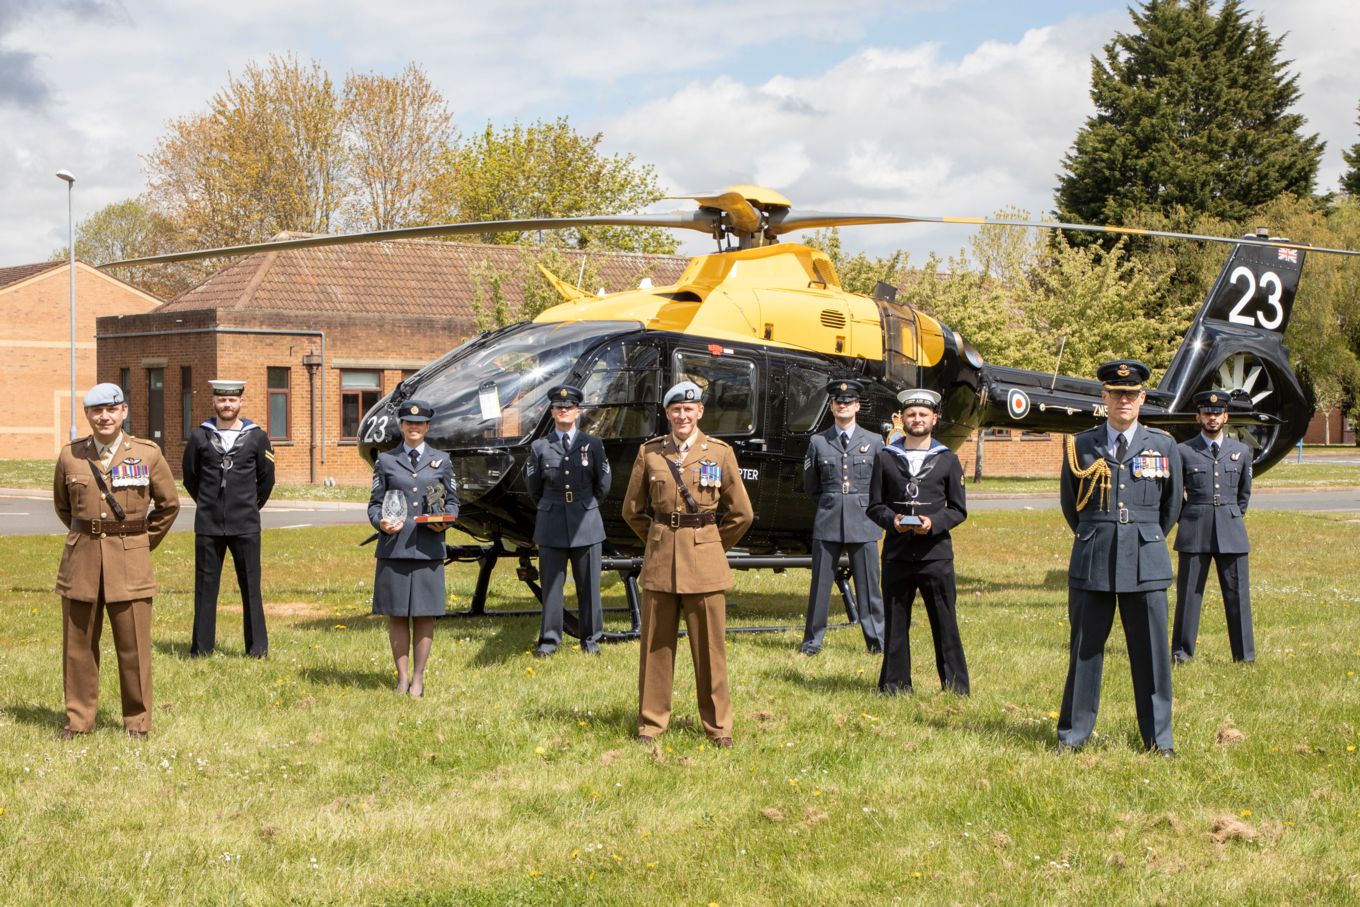 Image shows graduating personnel with Tim Peake in front of a helicopter.